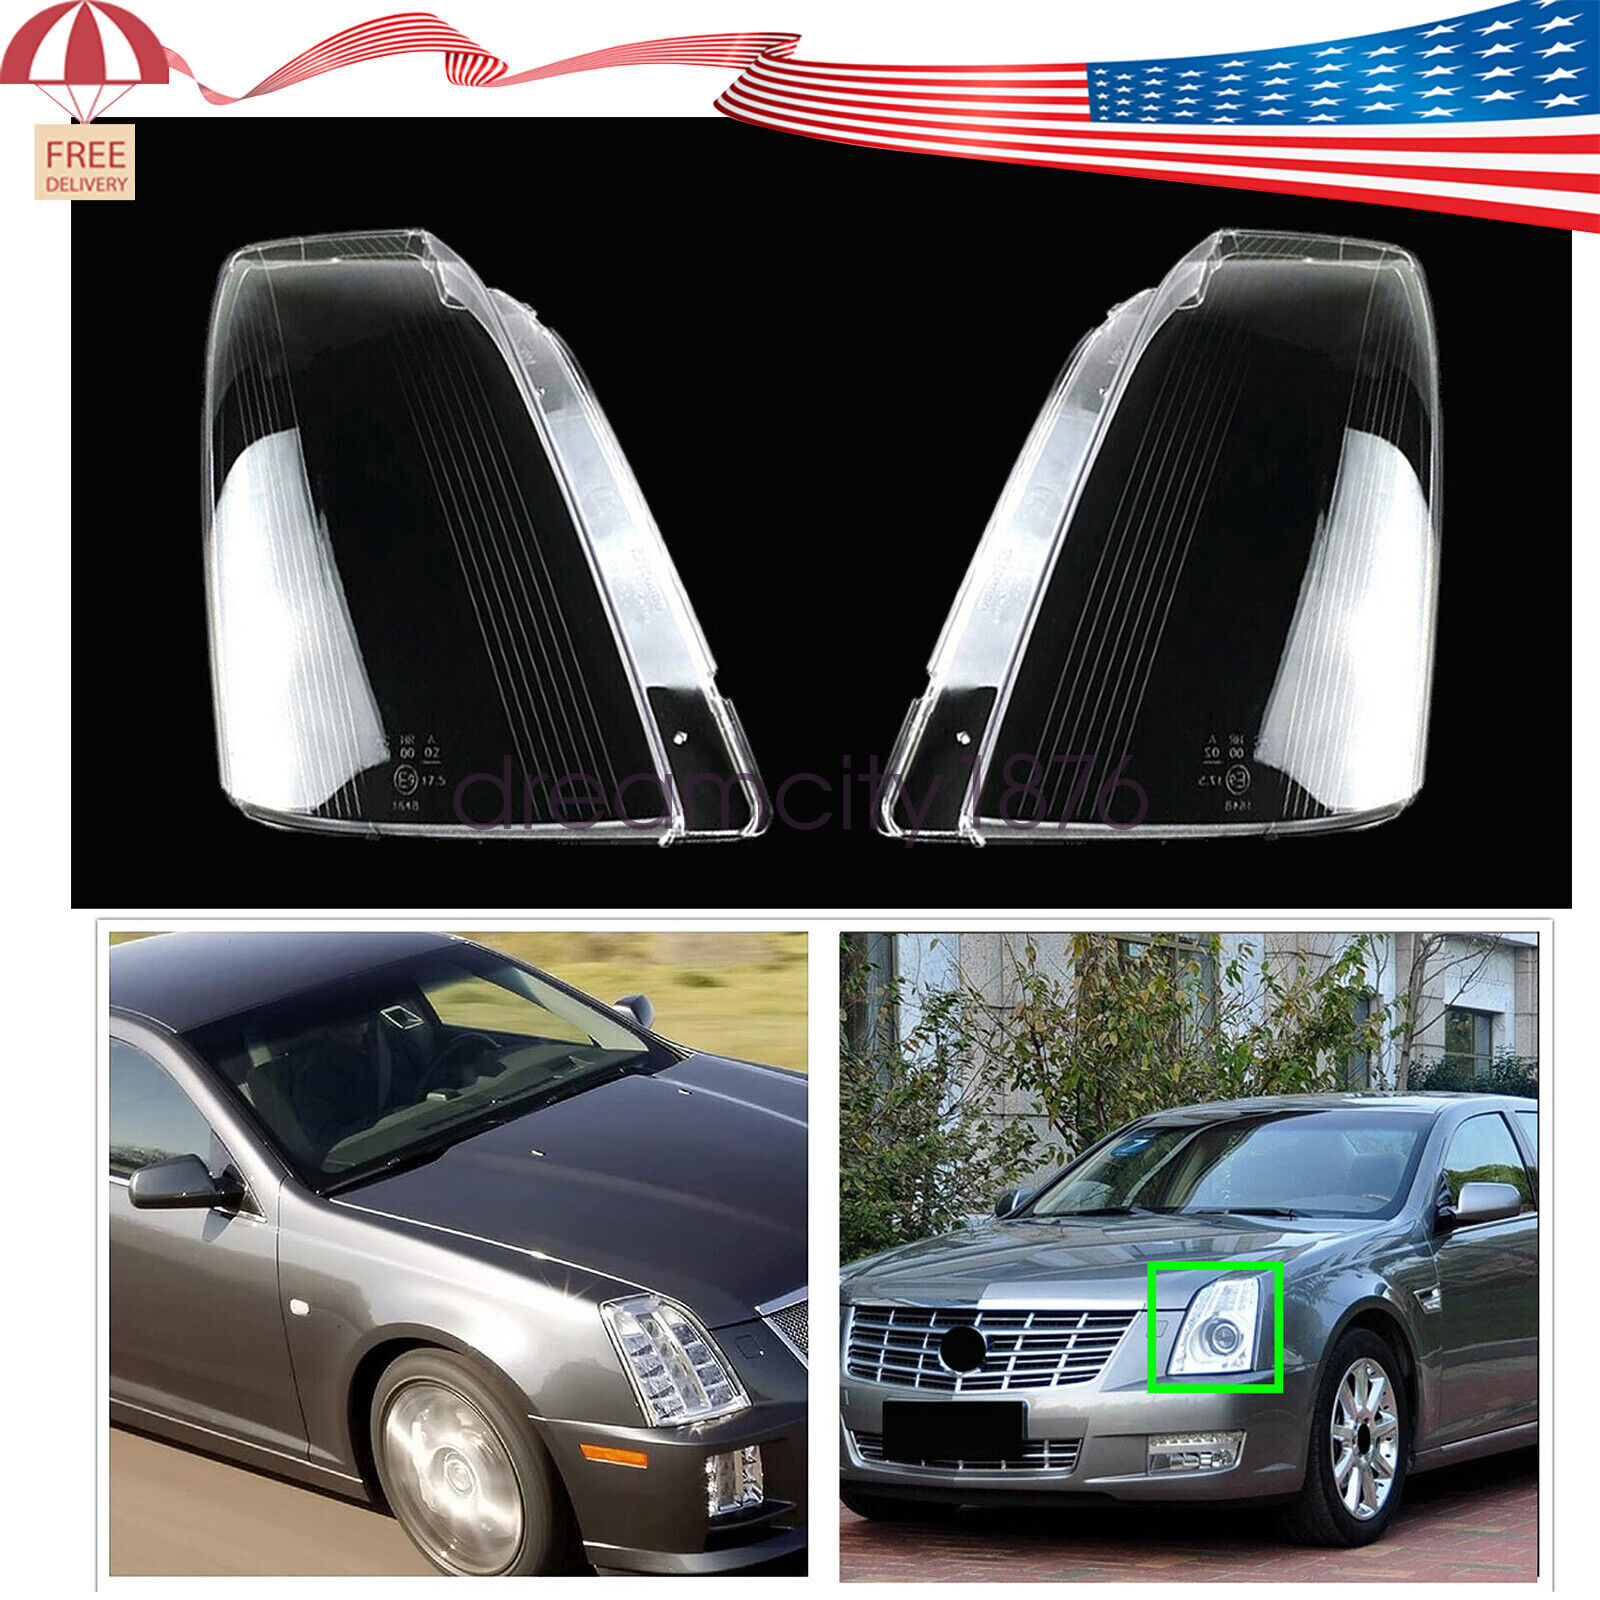 A Pair Front Headlight Lens Housing+ Sealant Glue For Cadillac STS 2005-2011